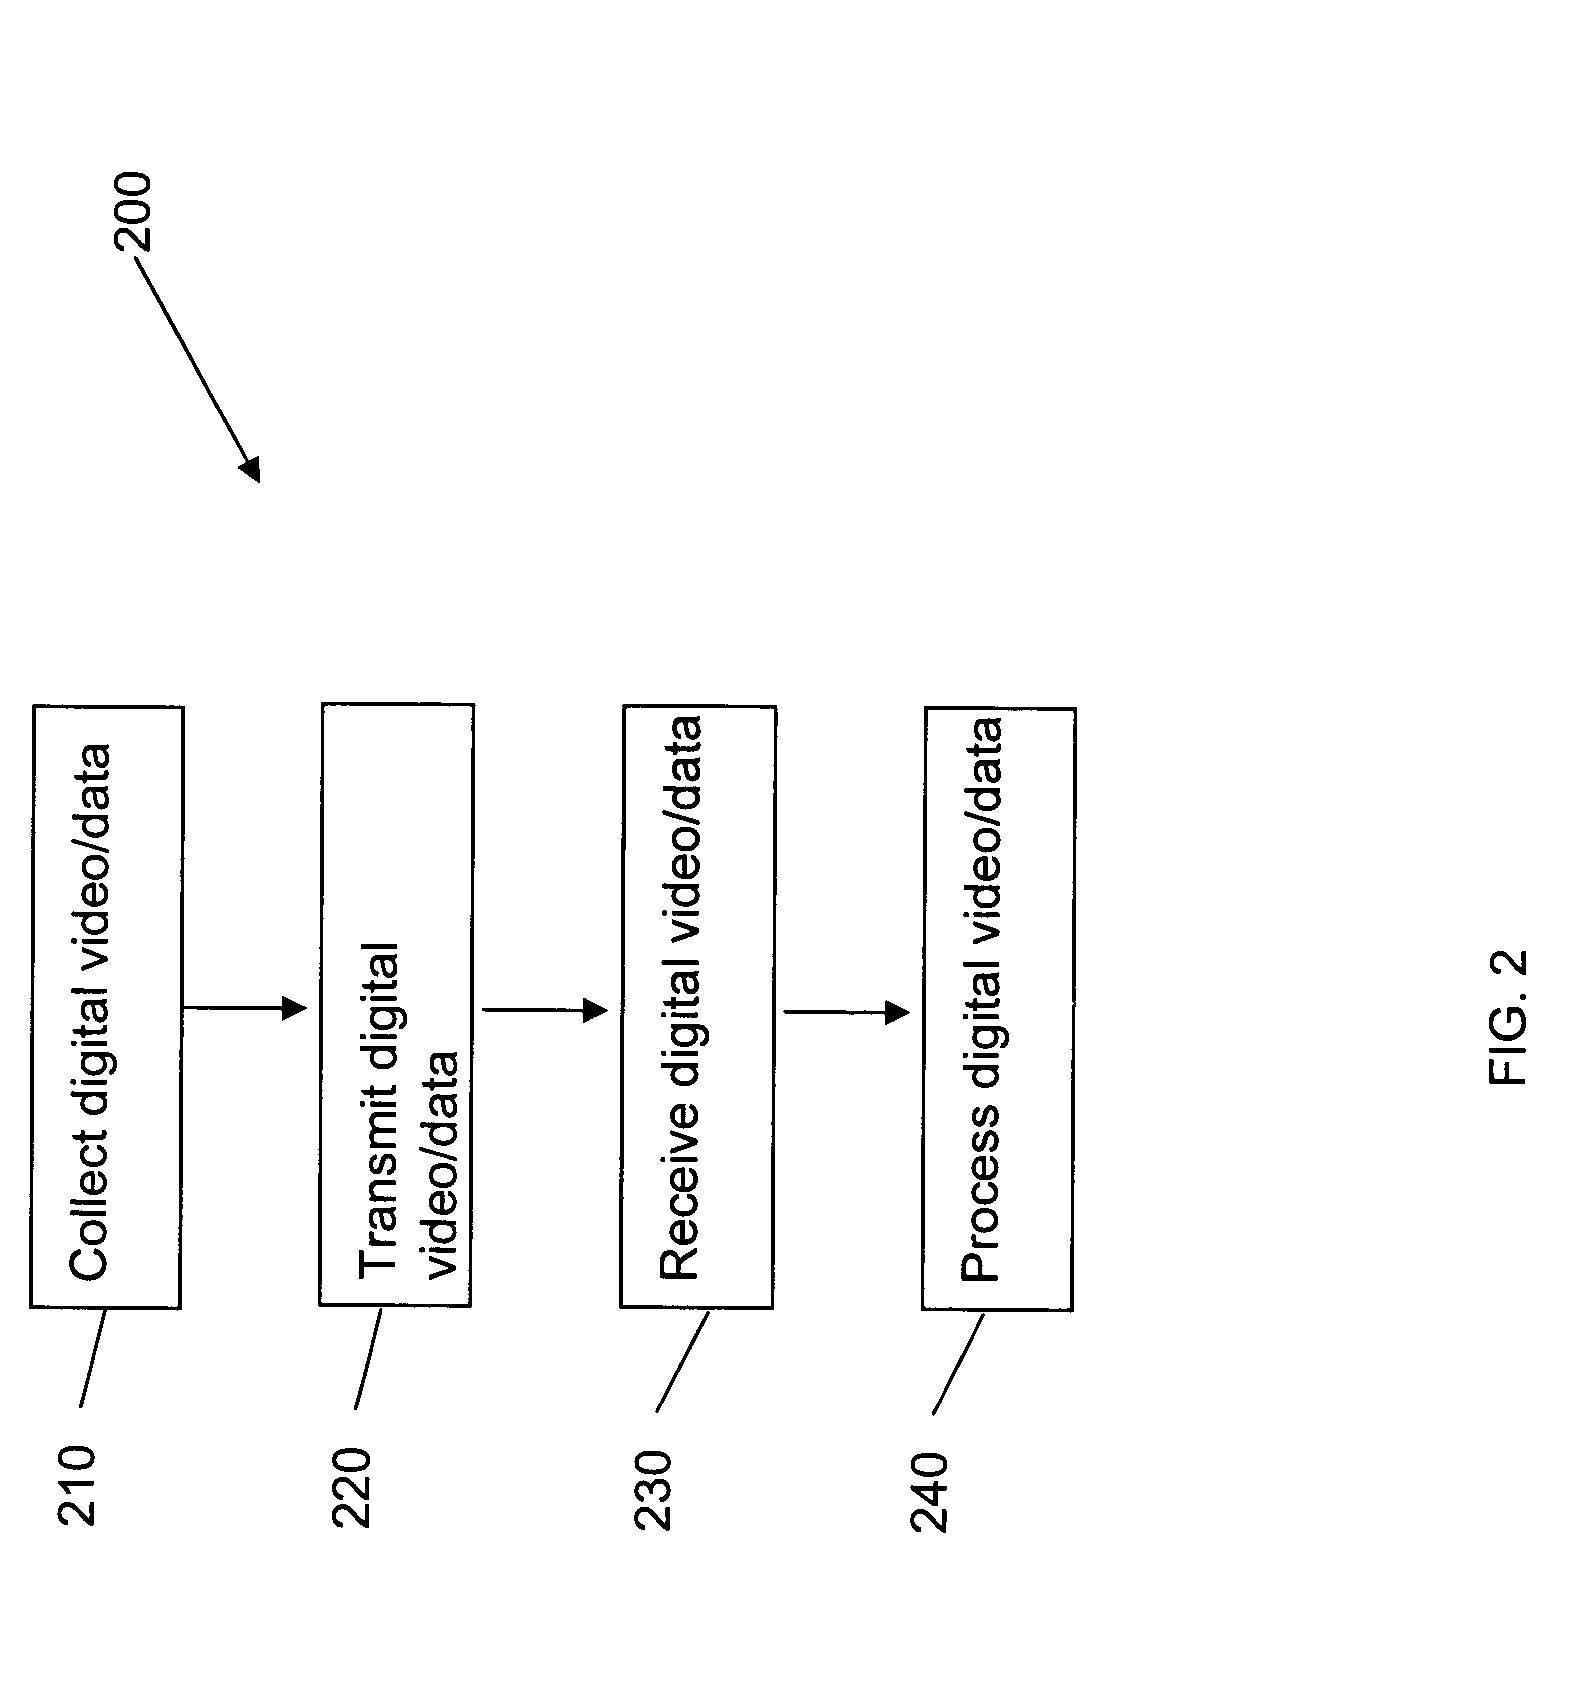 Mobile digital security system and method